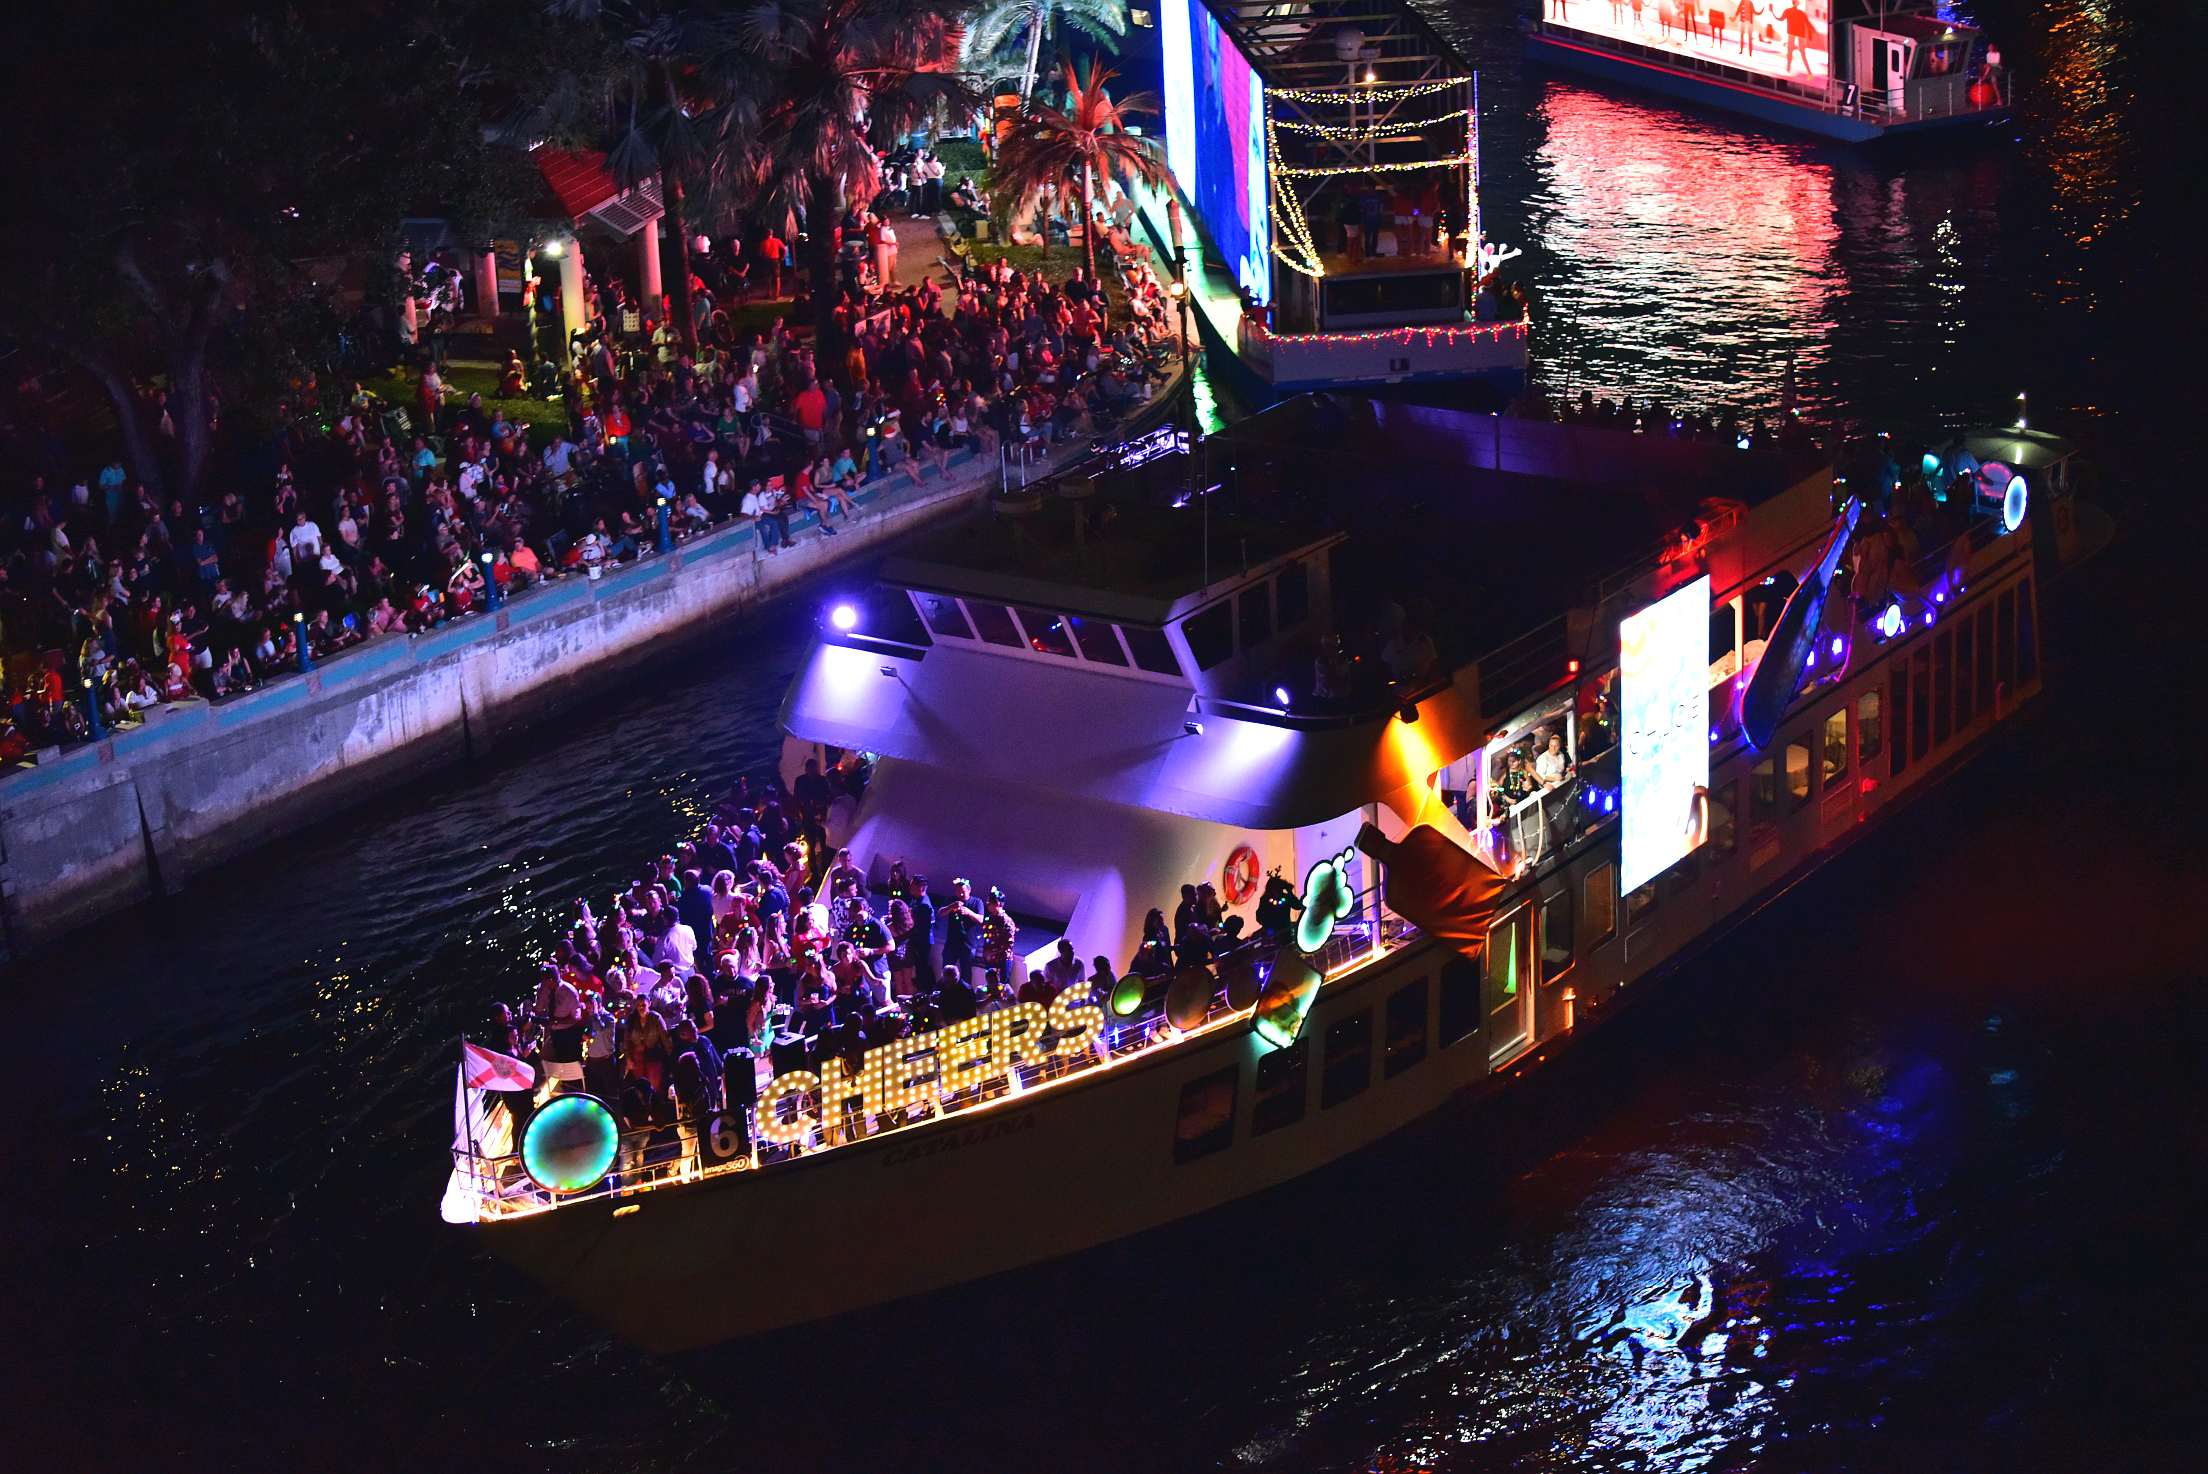 Republic National Distributing Company on board Catalina, boat number 6 in the 2021 Winterfest Boat Parade